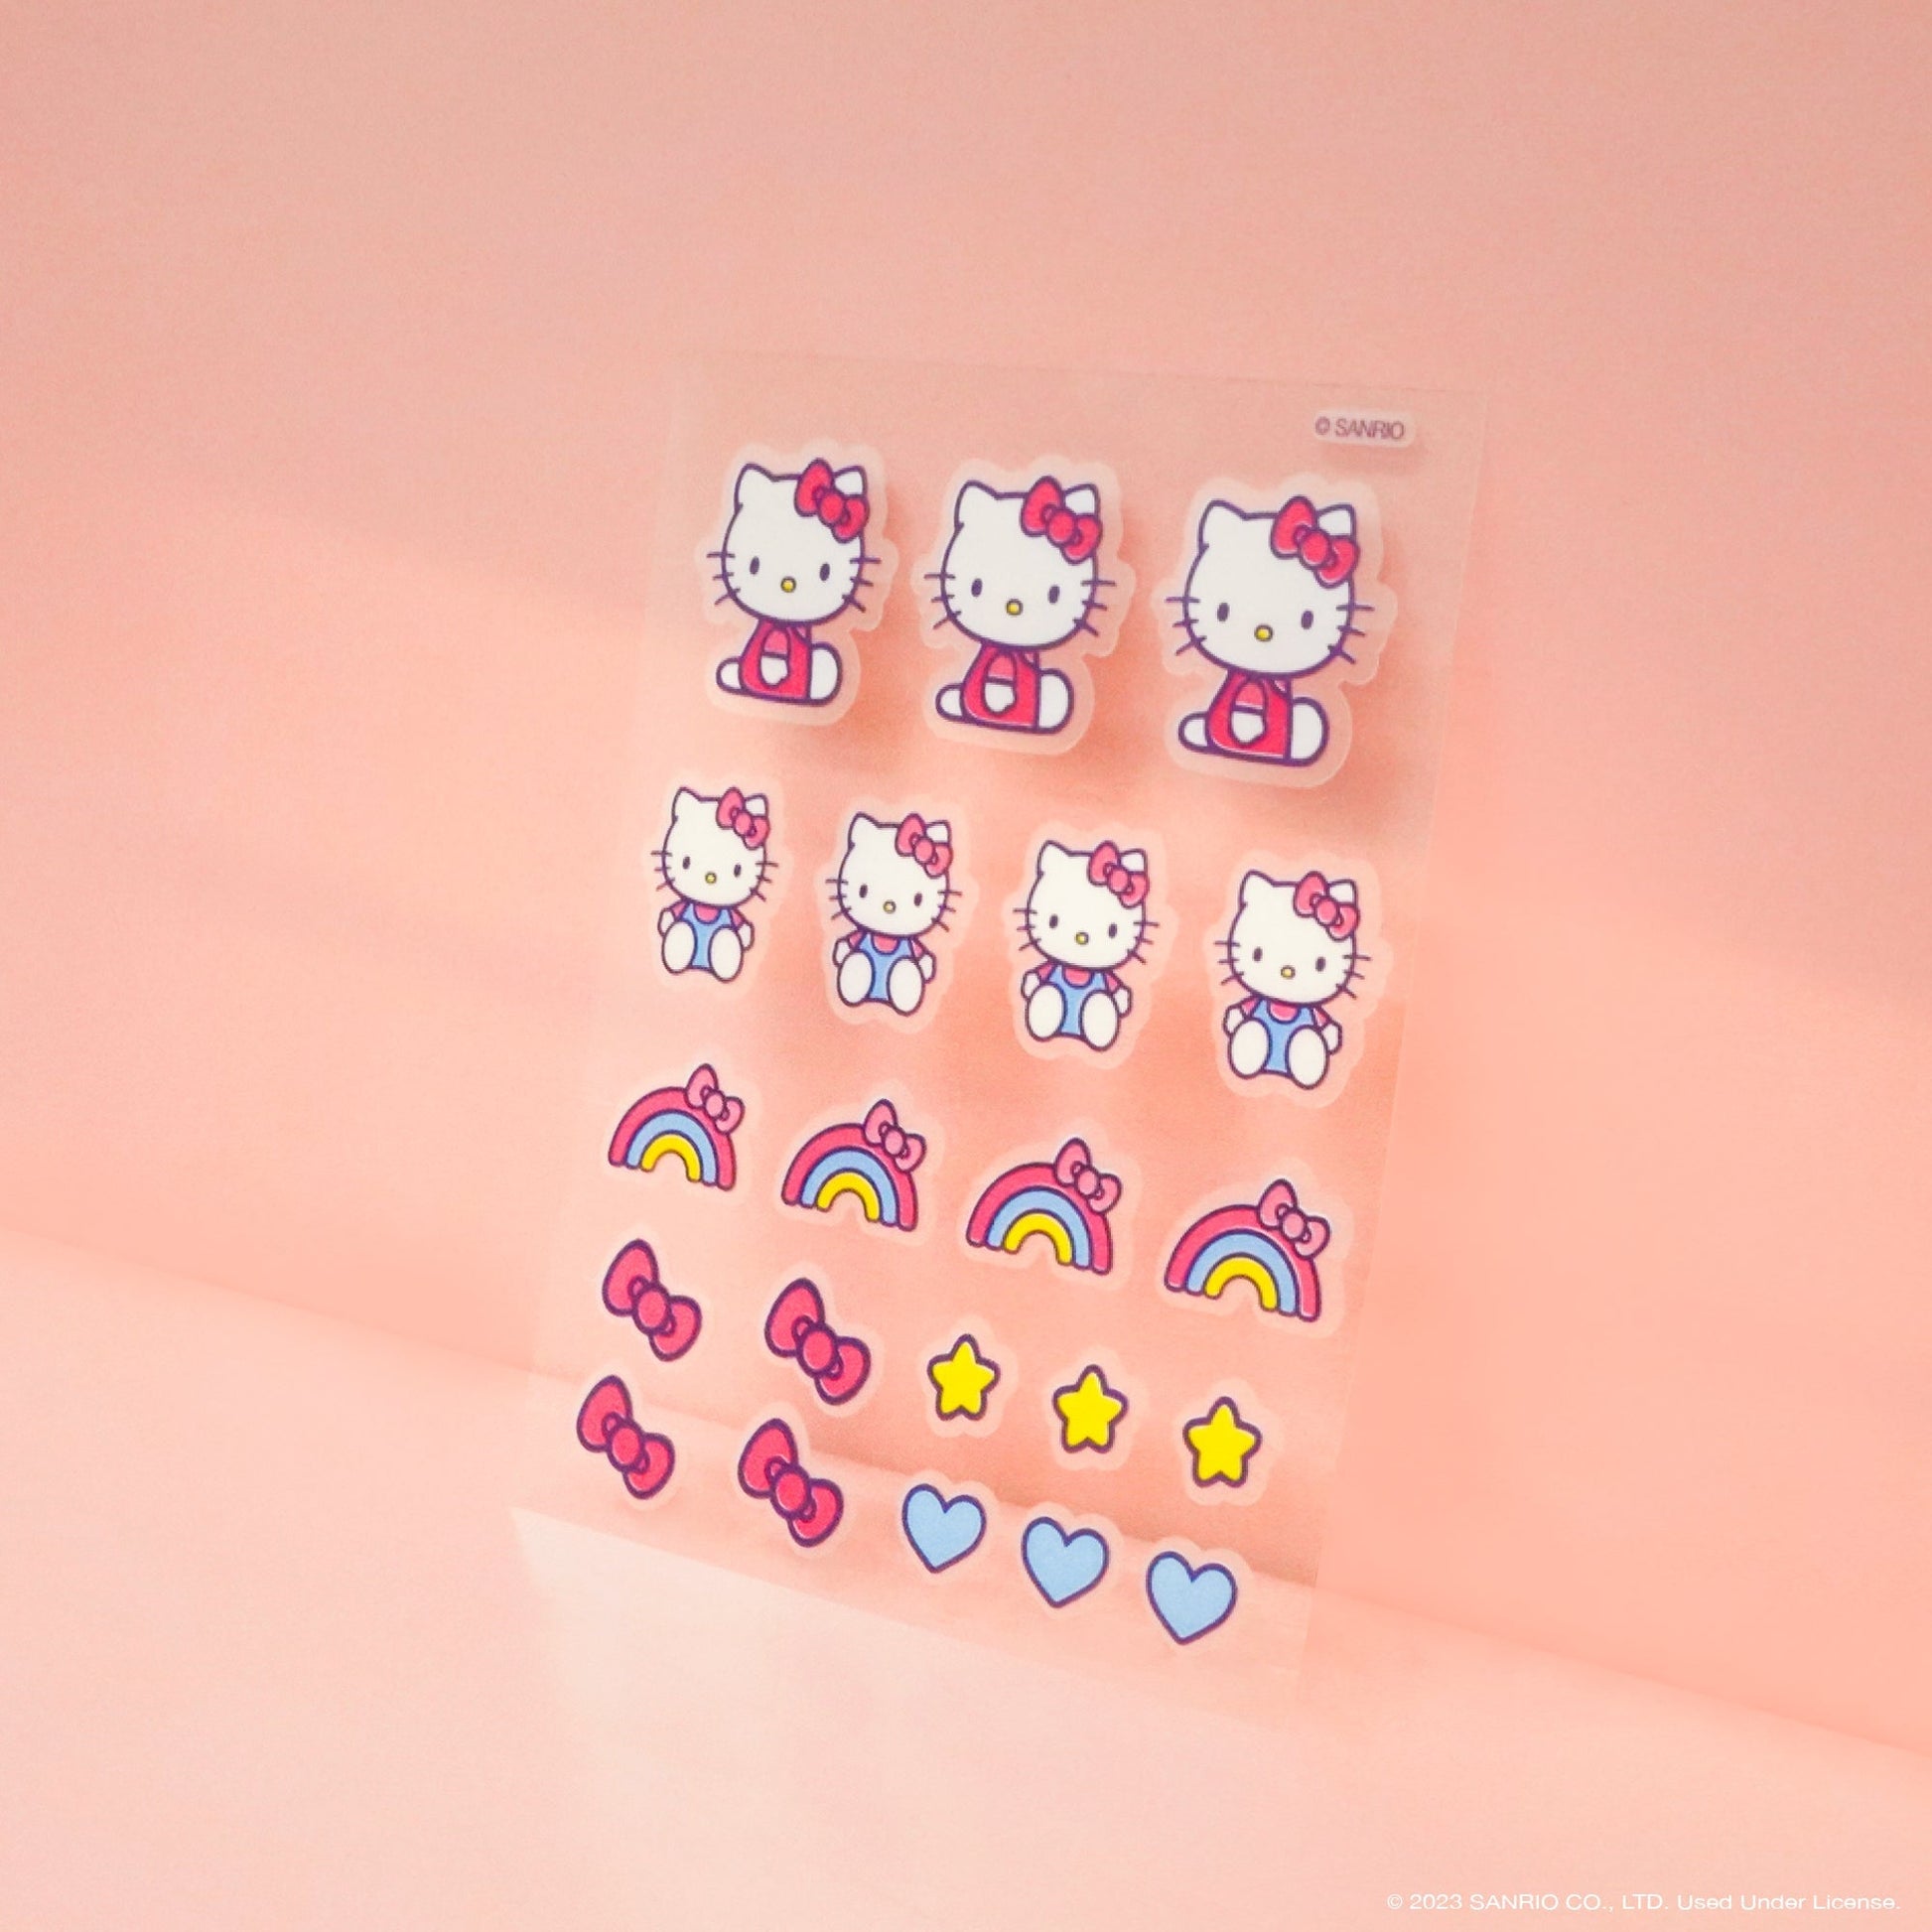 Hello Kitty Supercute Skin! Over-Makeup Blemish Patches